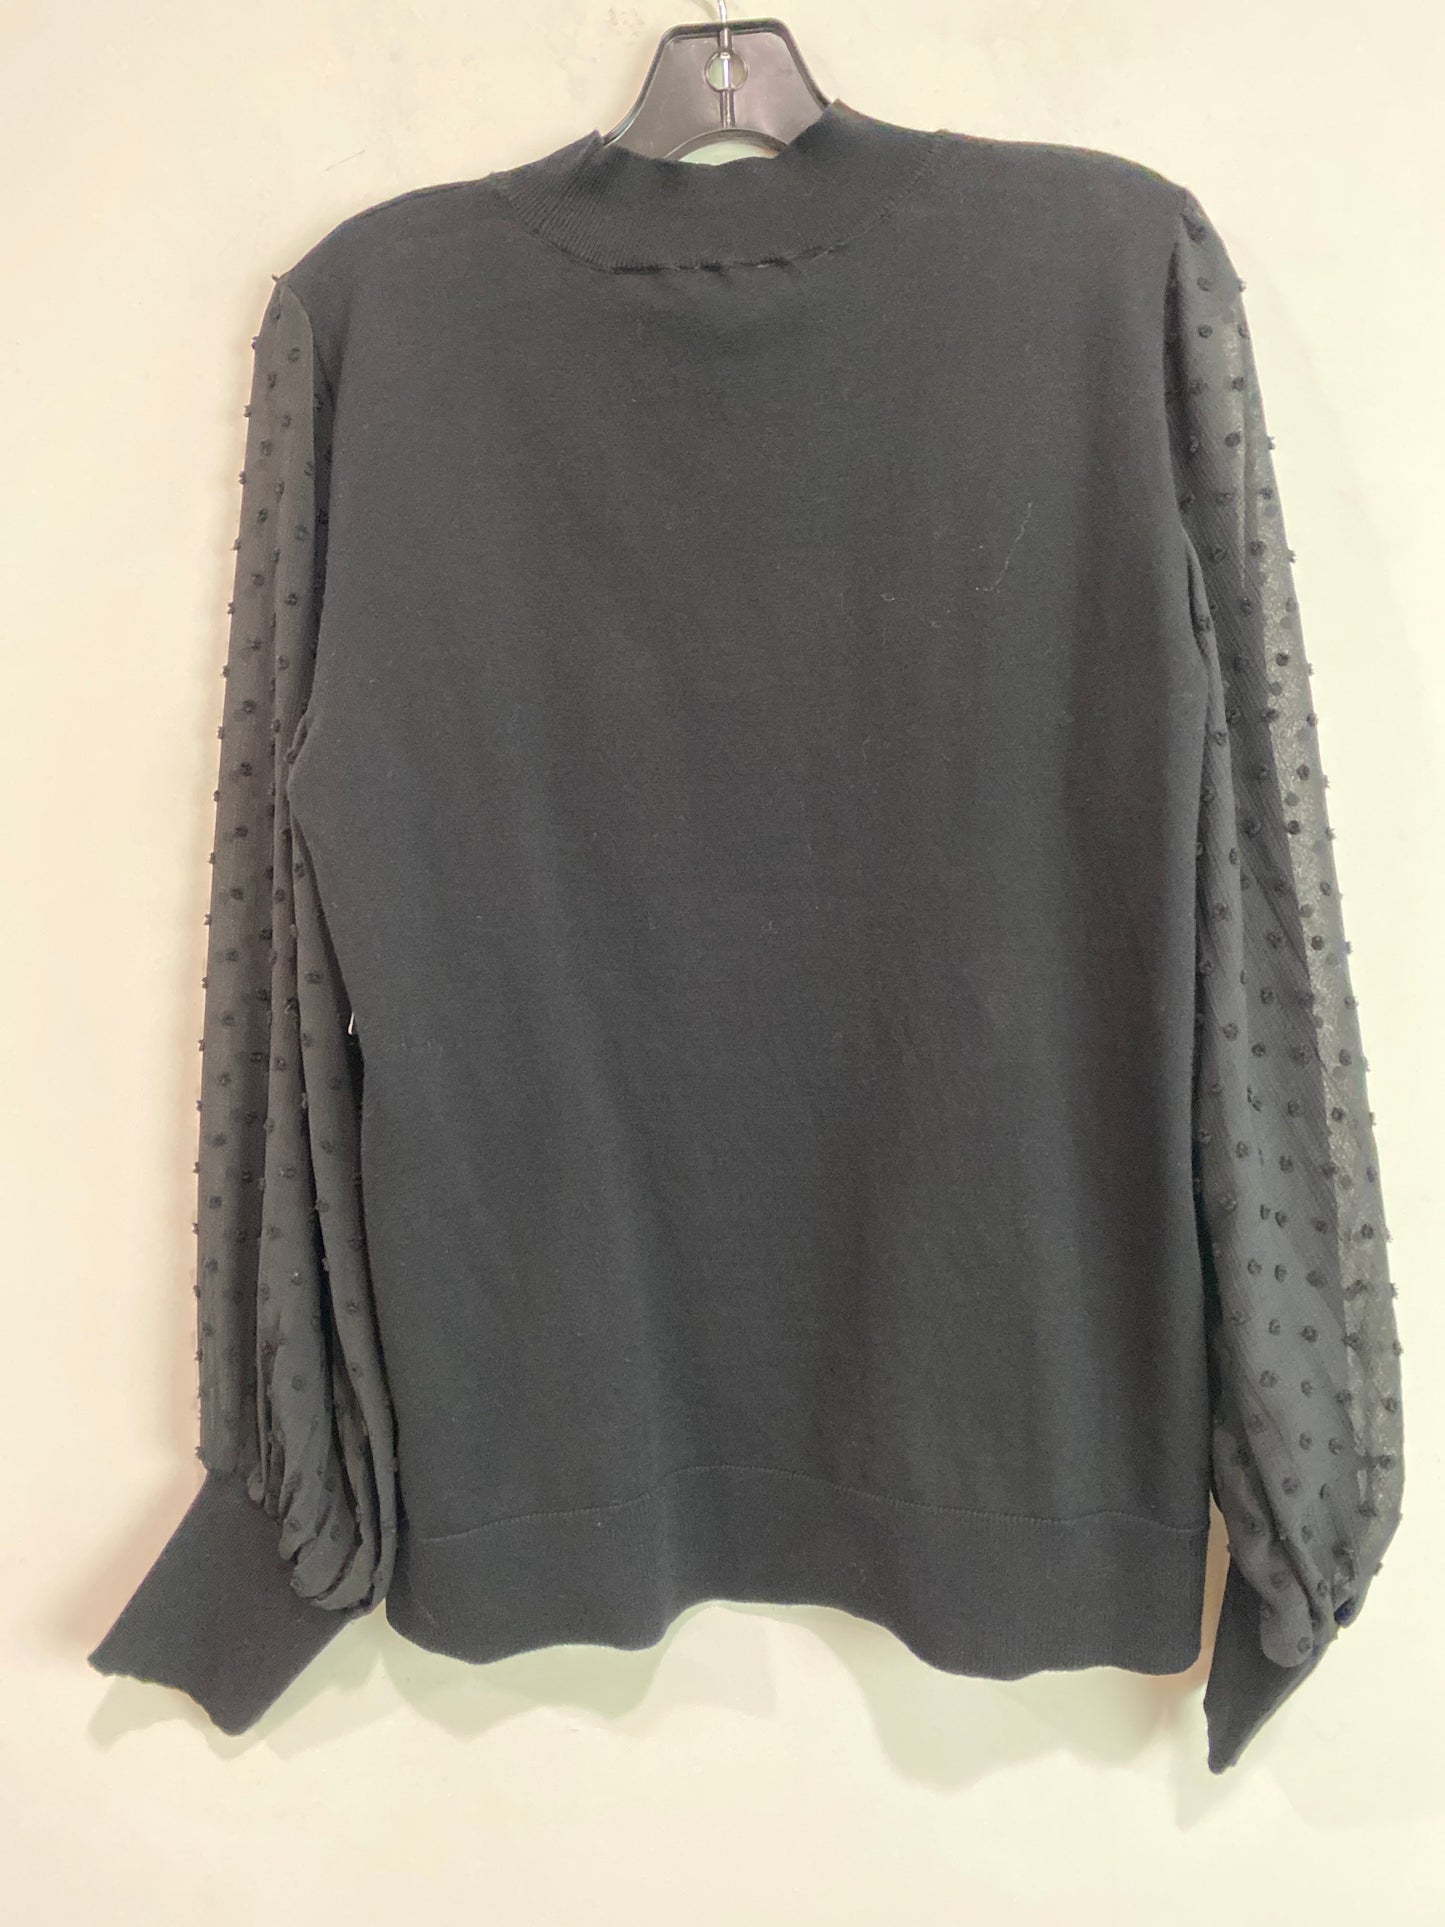 Black Top Long Sleeve Vince Camuto, Size L